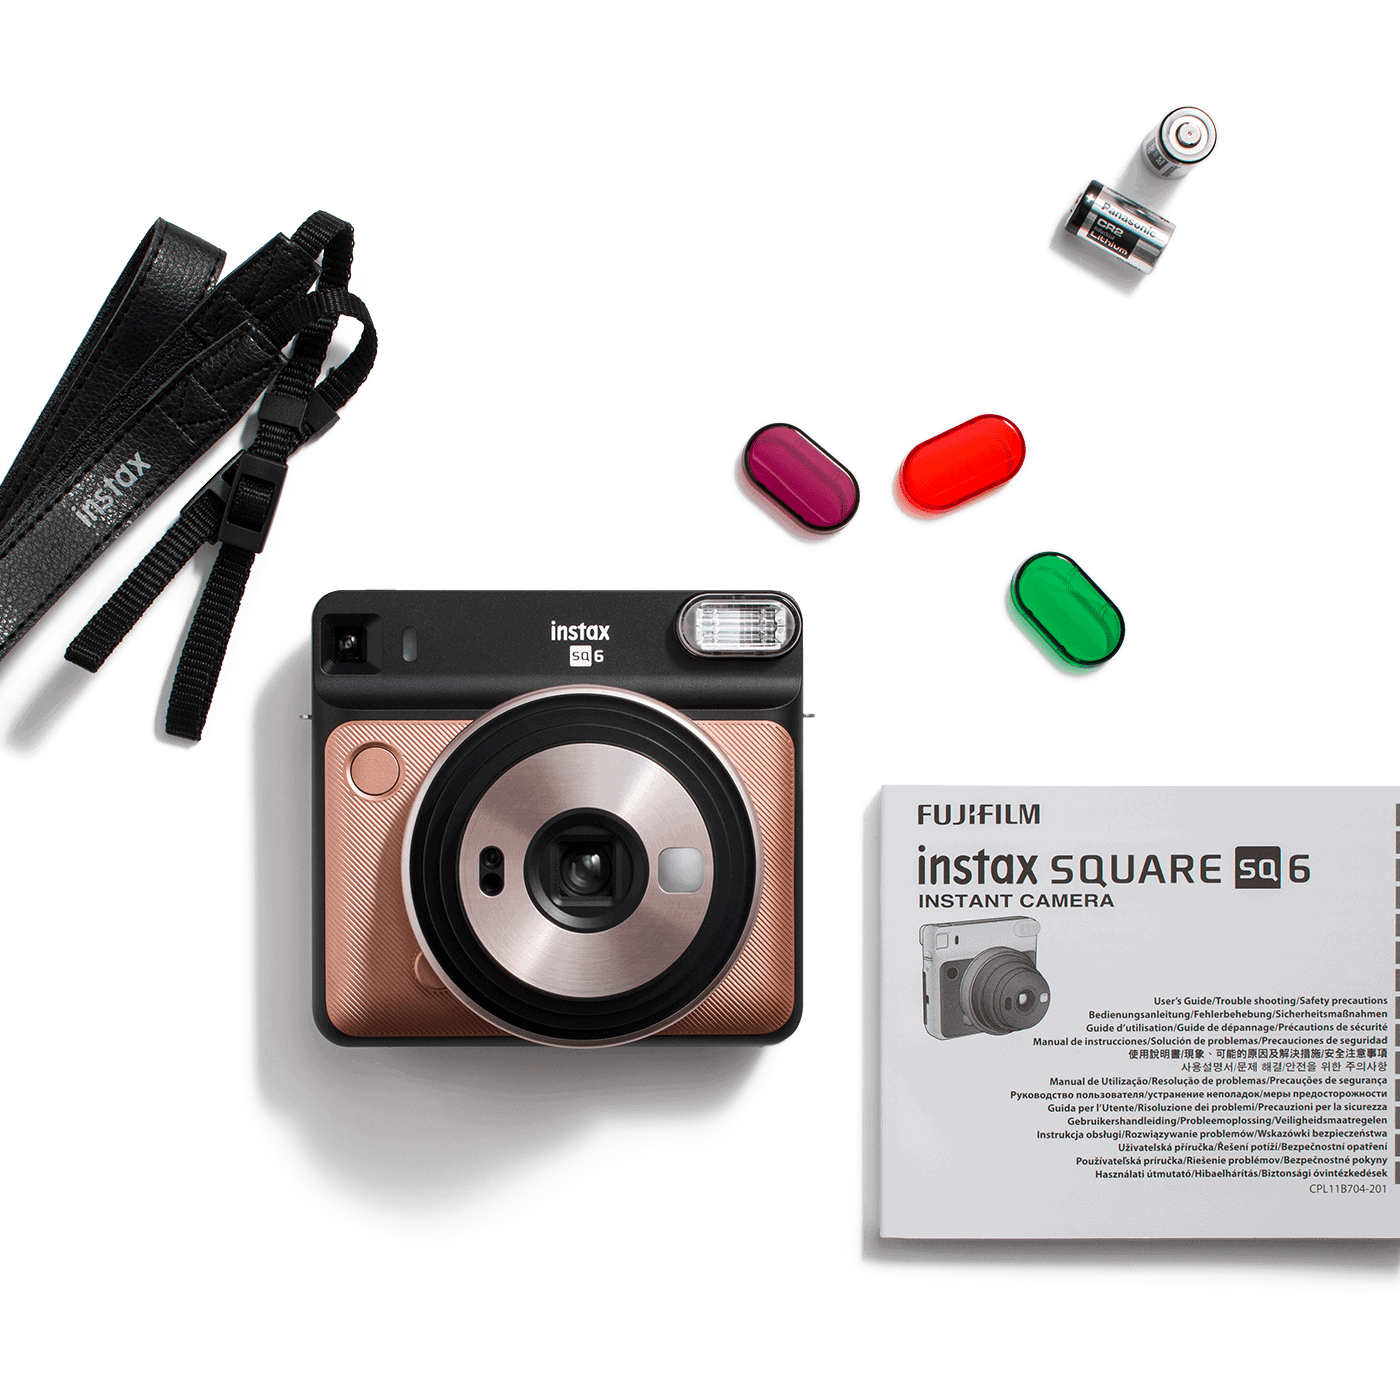 Fujifilm Instax Square SQ6 Camera Review » Shoot It With Film